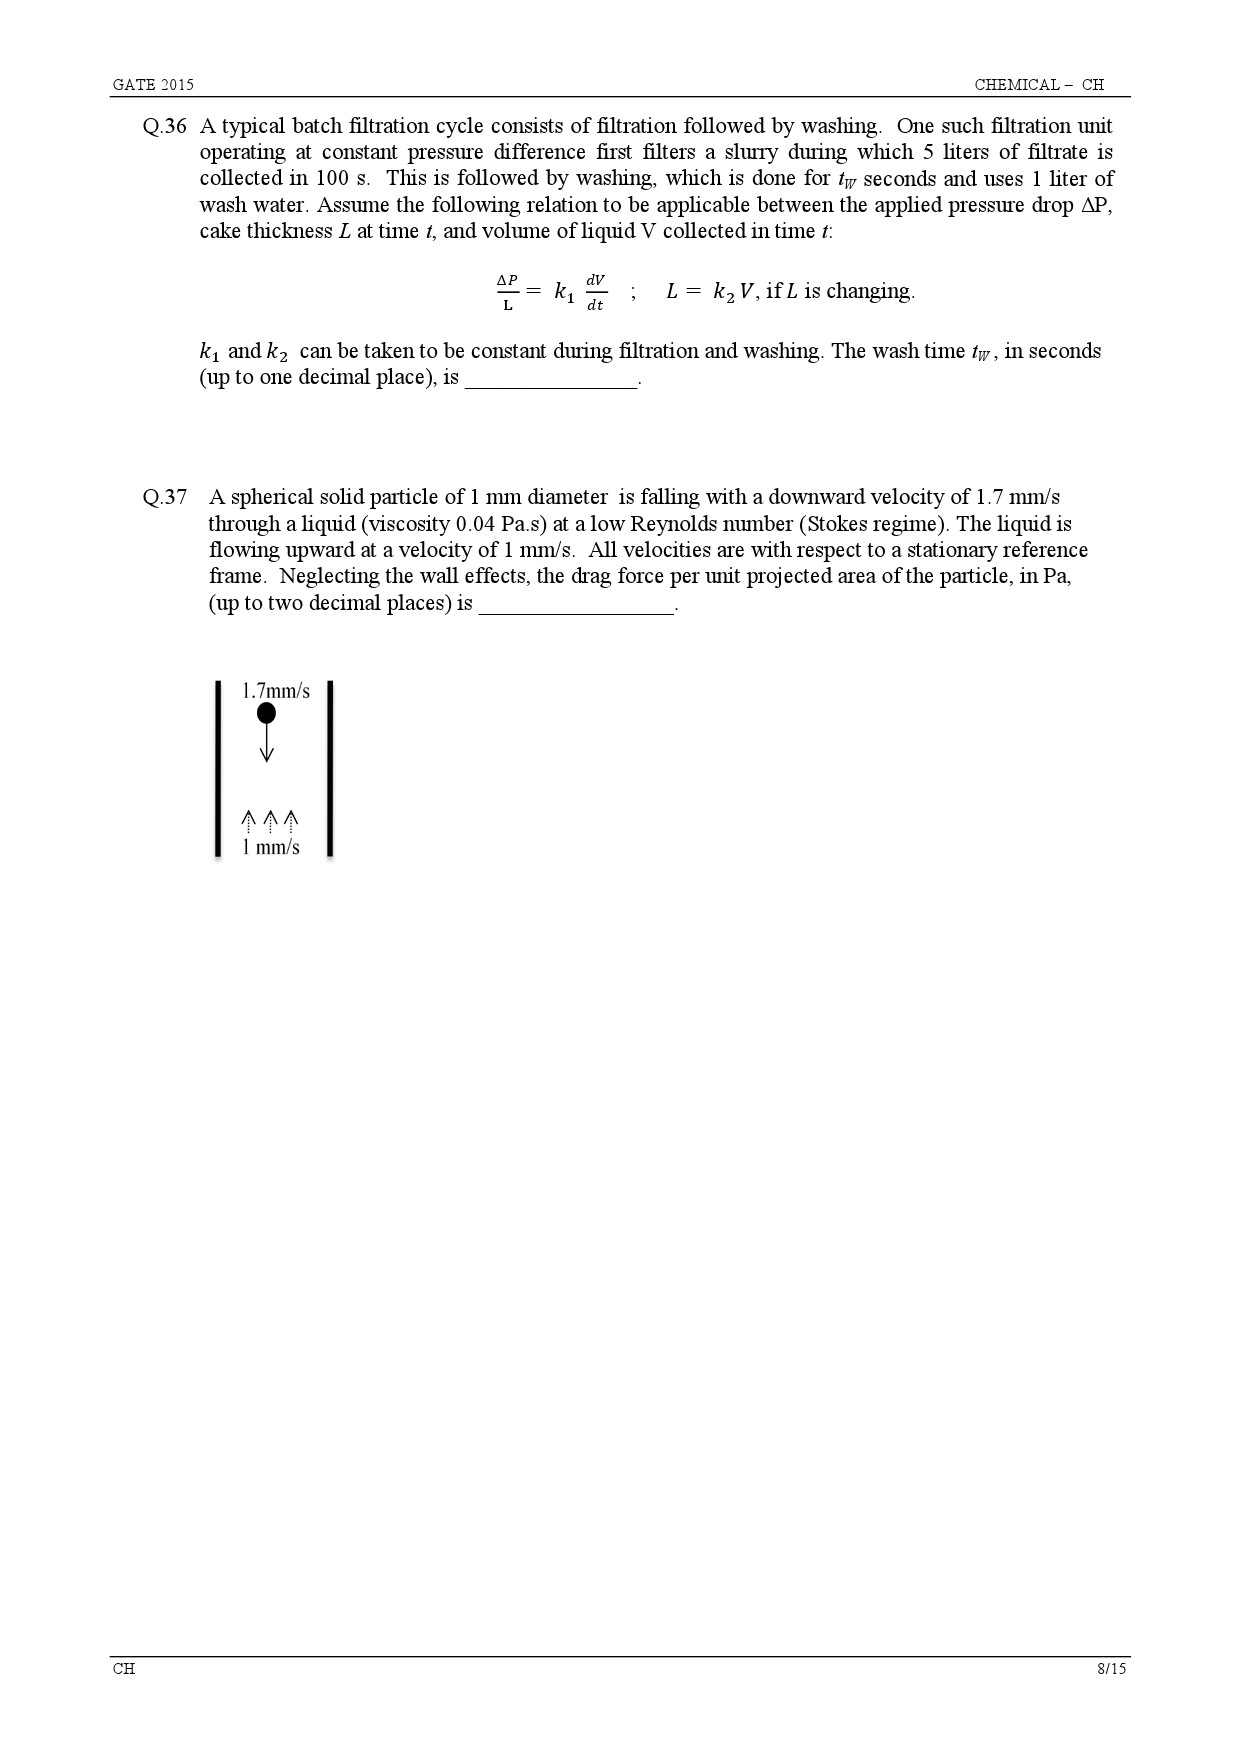 GATE Exam Question Paper 2015 Chemical Engineering 8